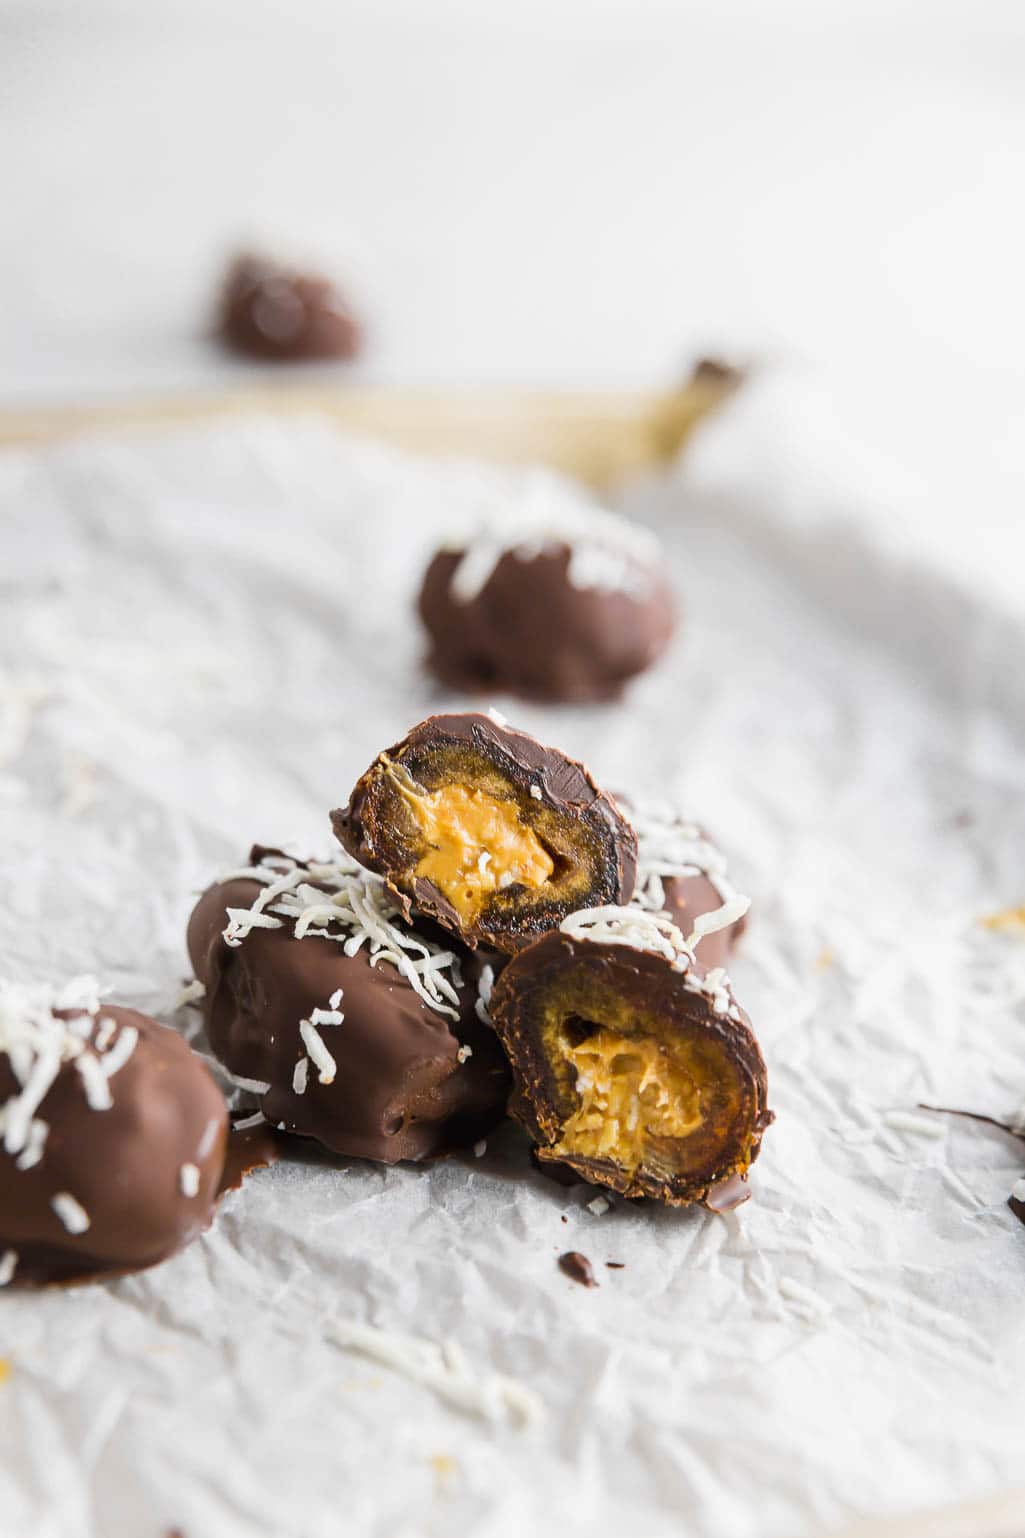 Several chocolate covered peanut butter stuffed dates topped with shredded coconut on white parchment paper.